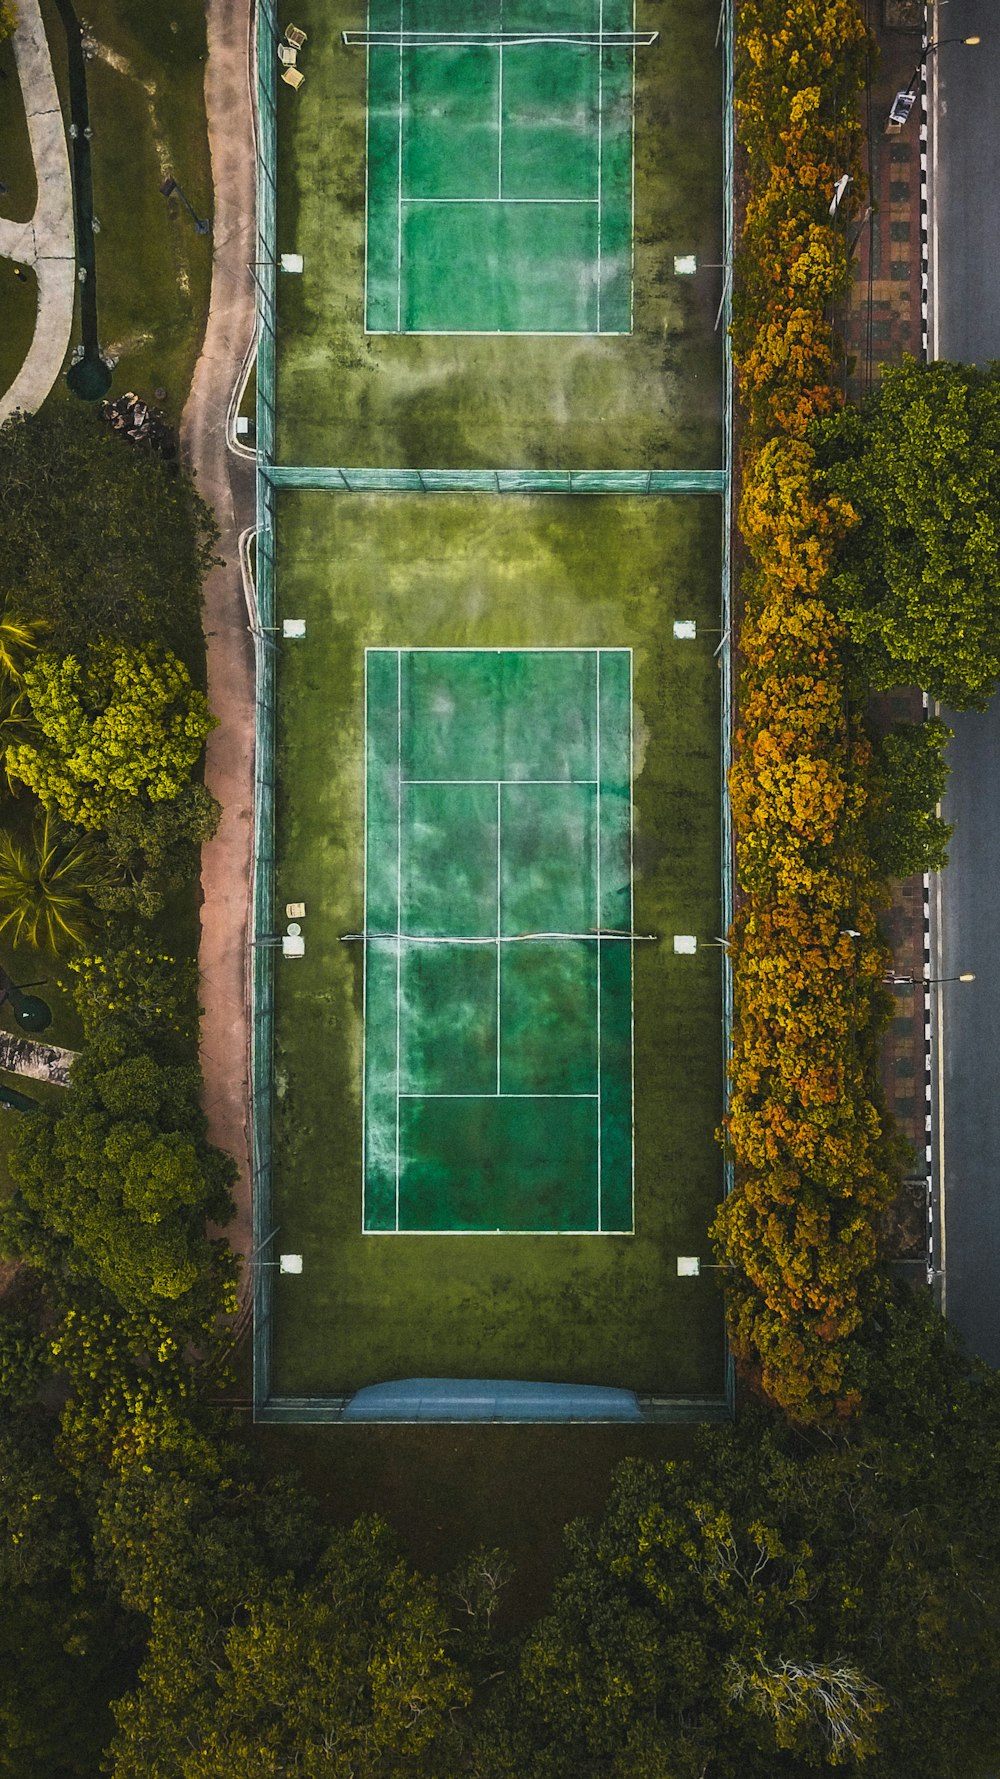 aerial view of sports court between trees